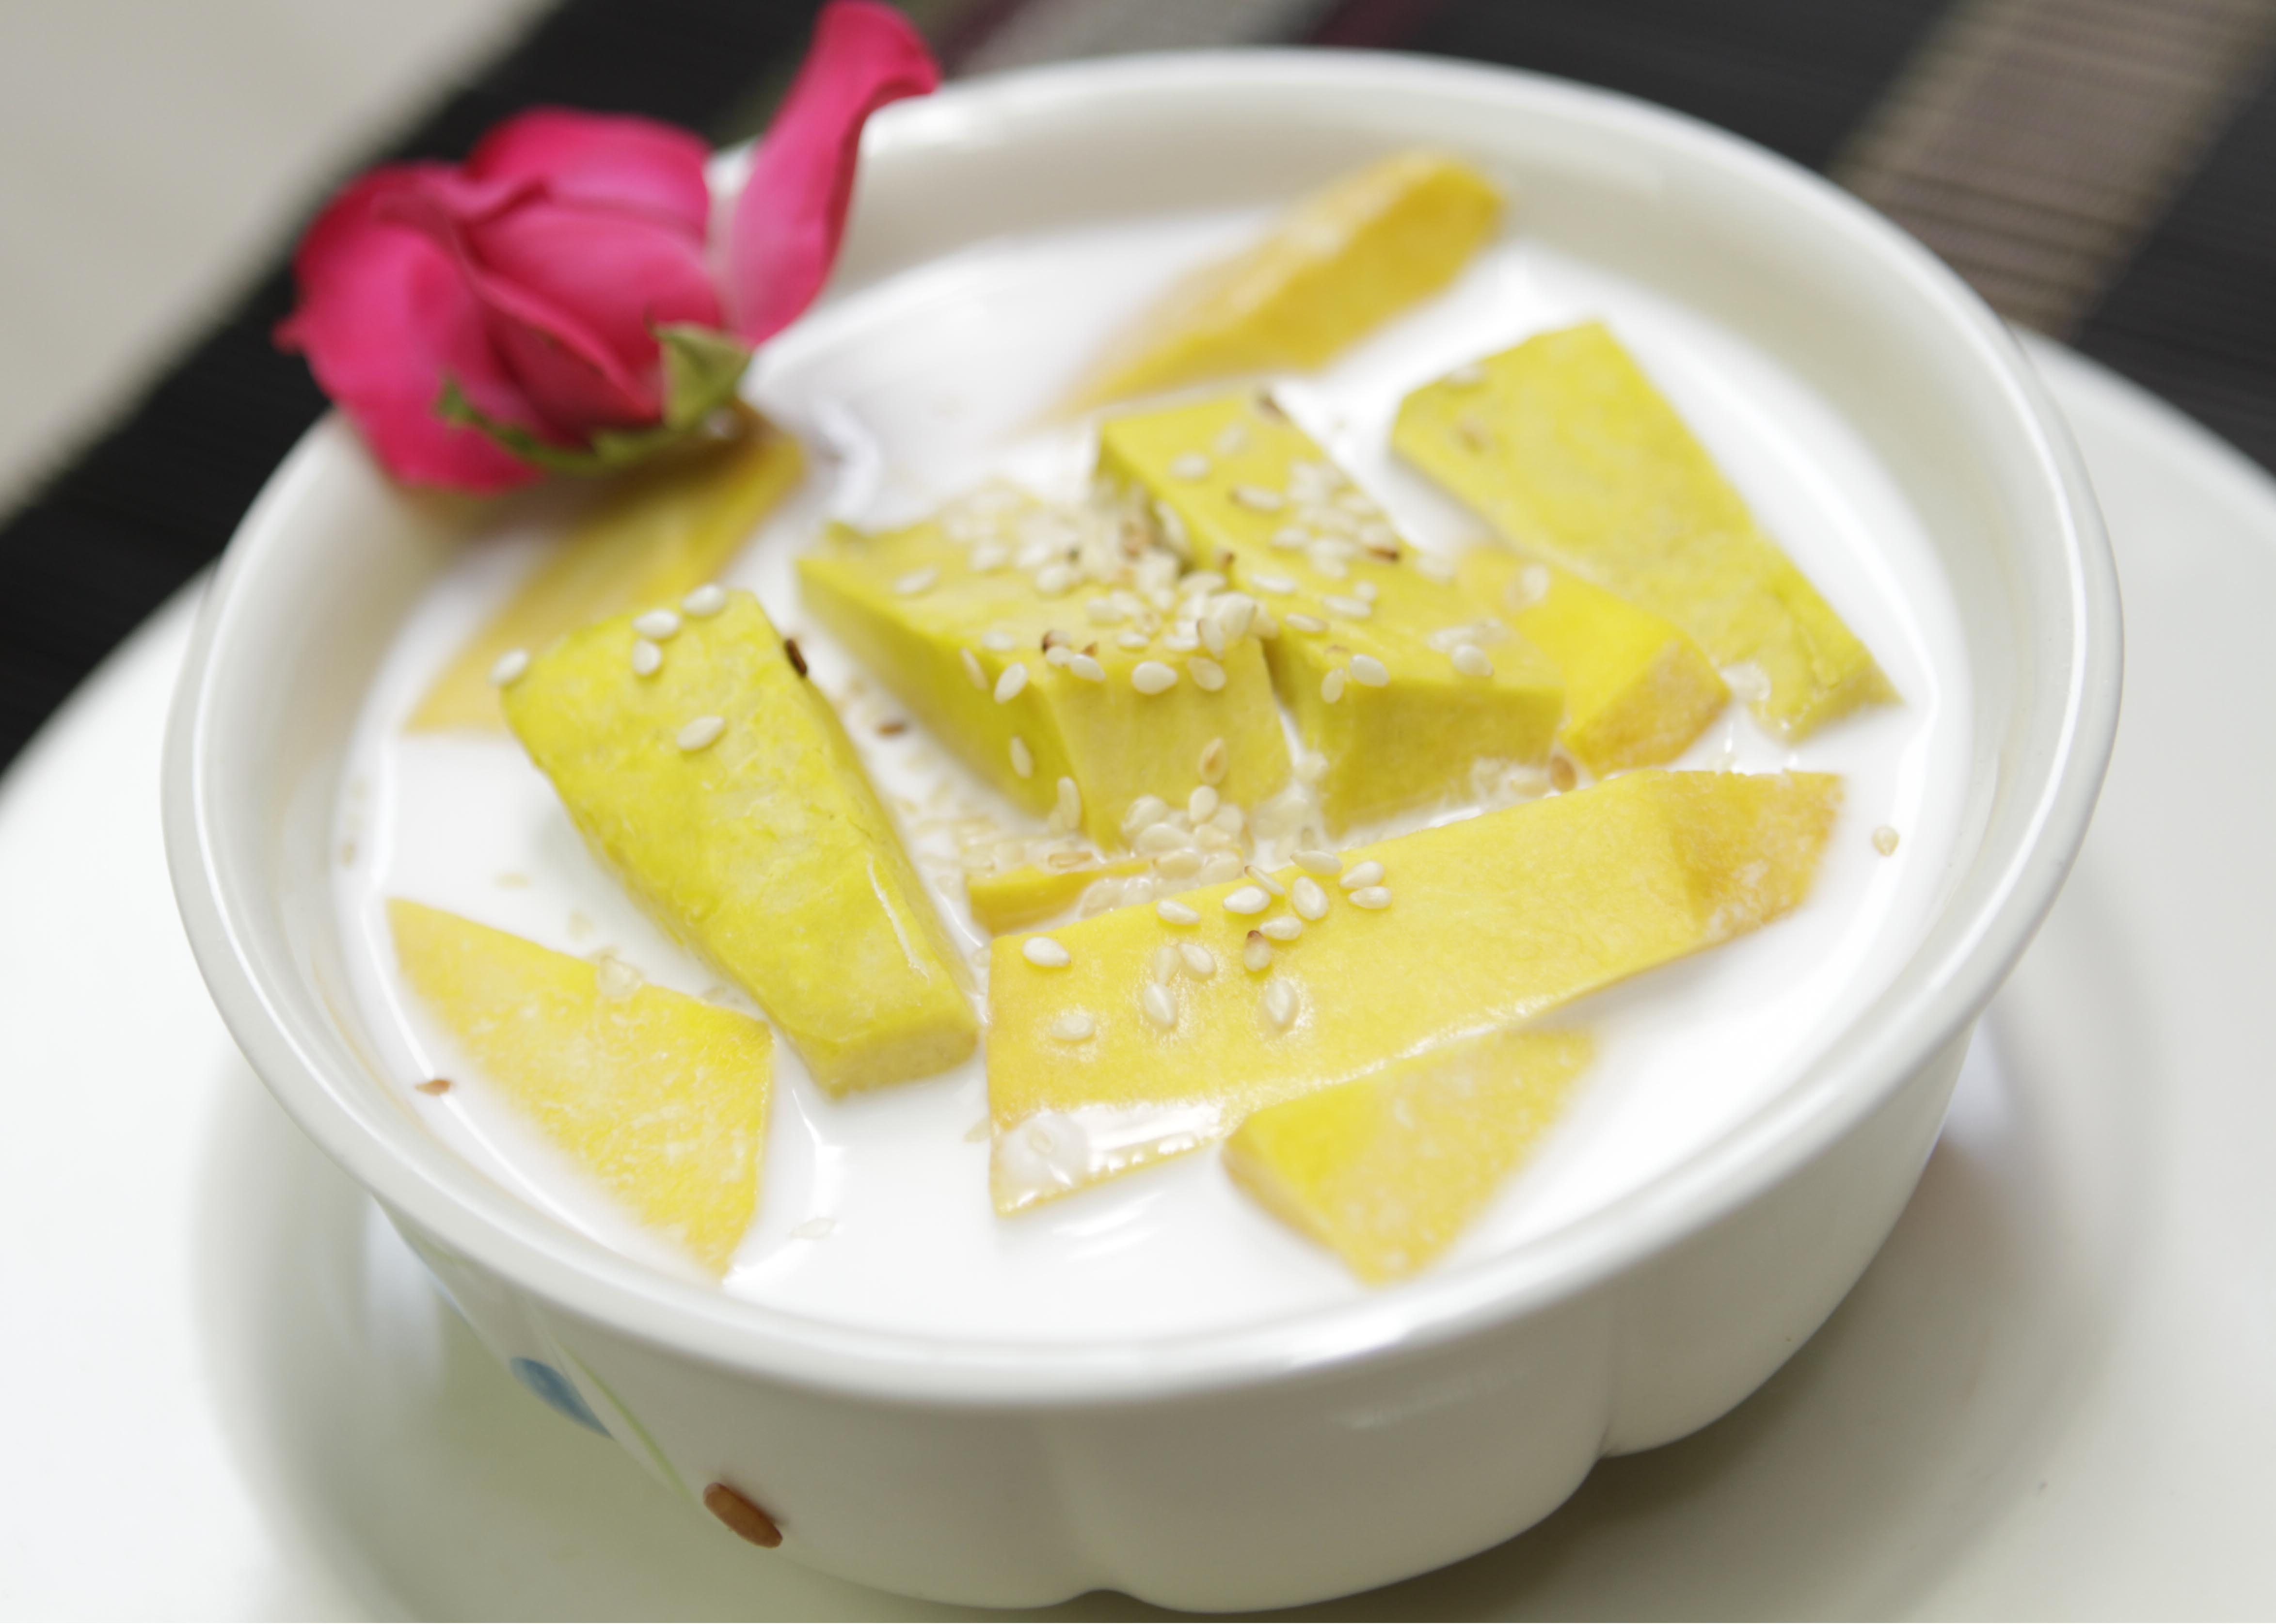 Steamed pumpkin slices in sweet coconut milk dessert, topped with sesame seeds and a pink rose as garnish.